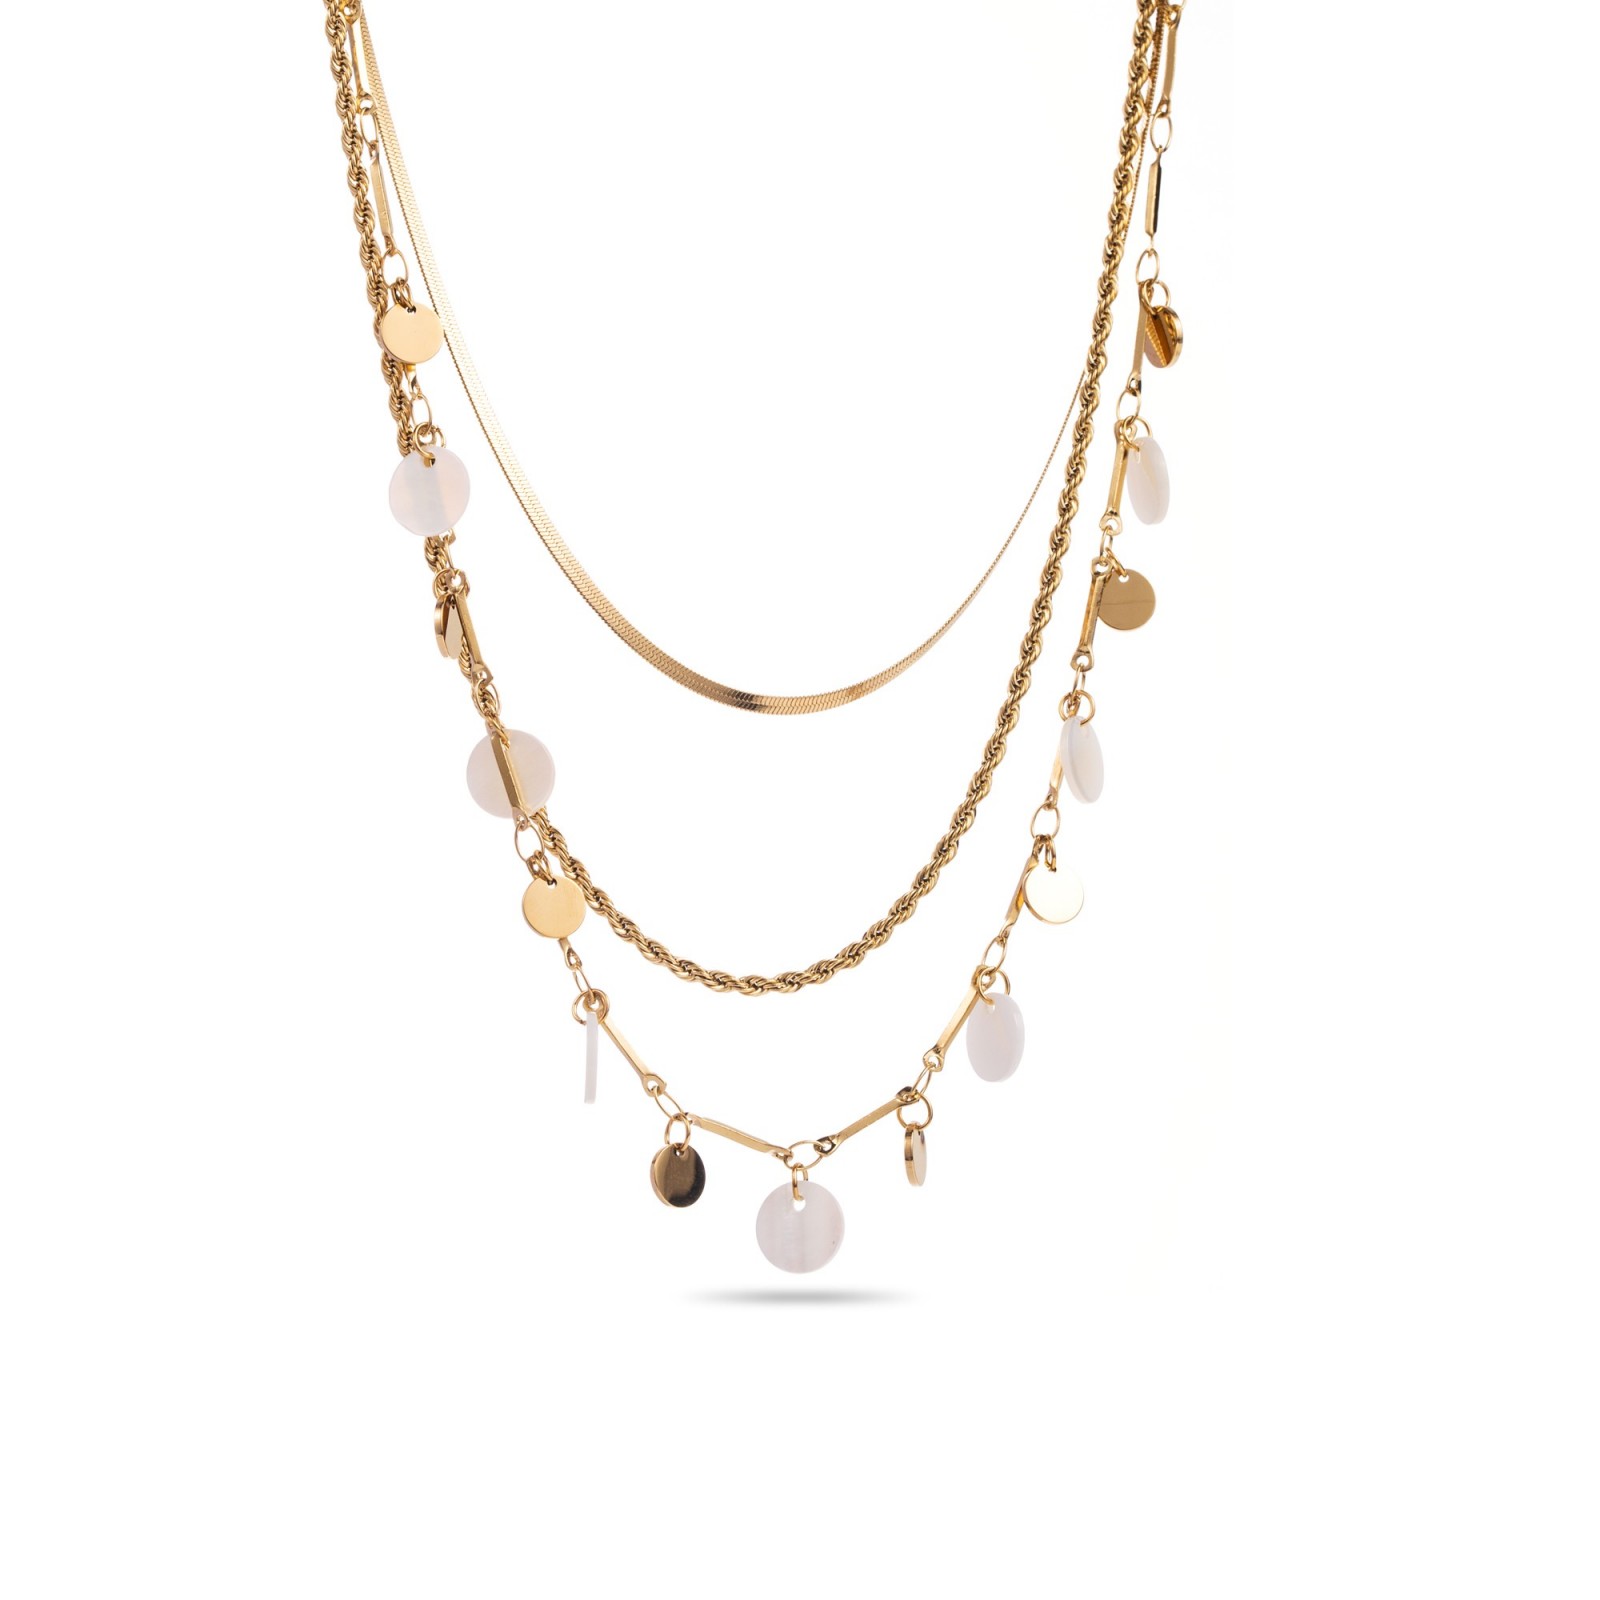 Multi-Row Necklace with Colored Mother-of-Pearl Tassel Color:White